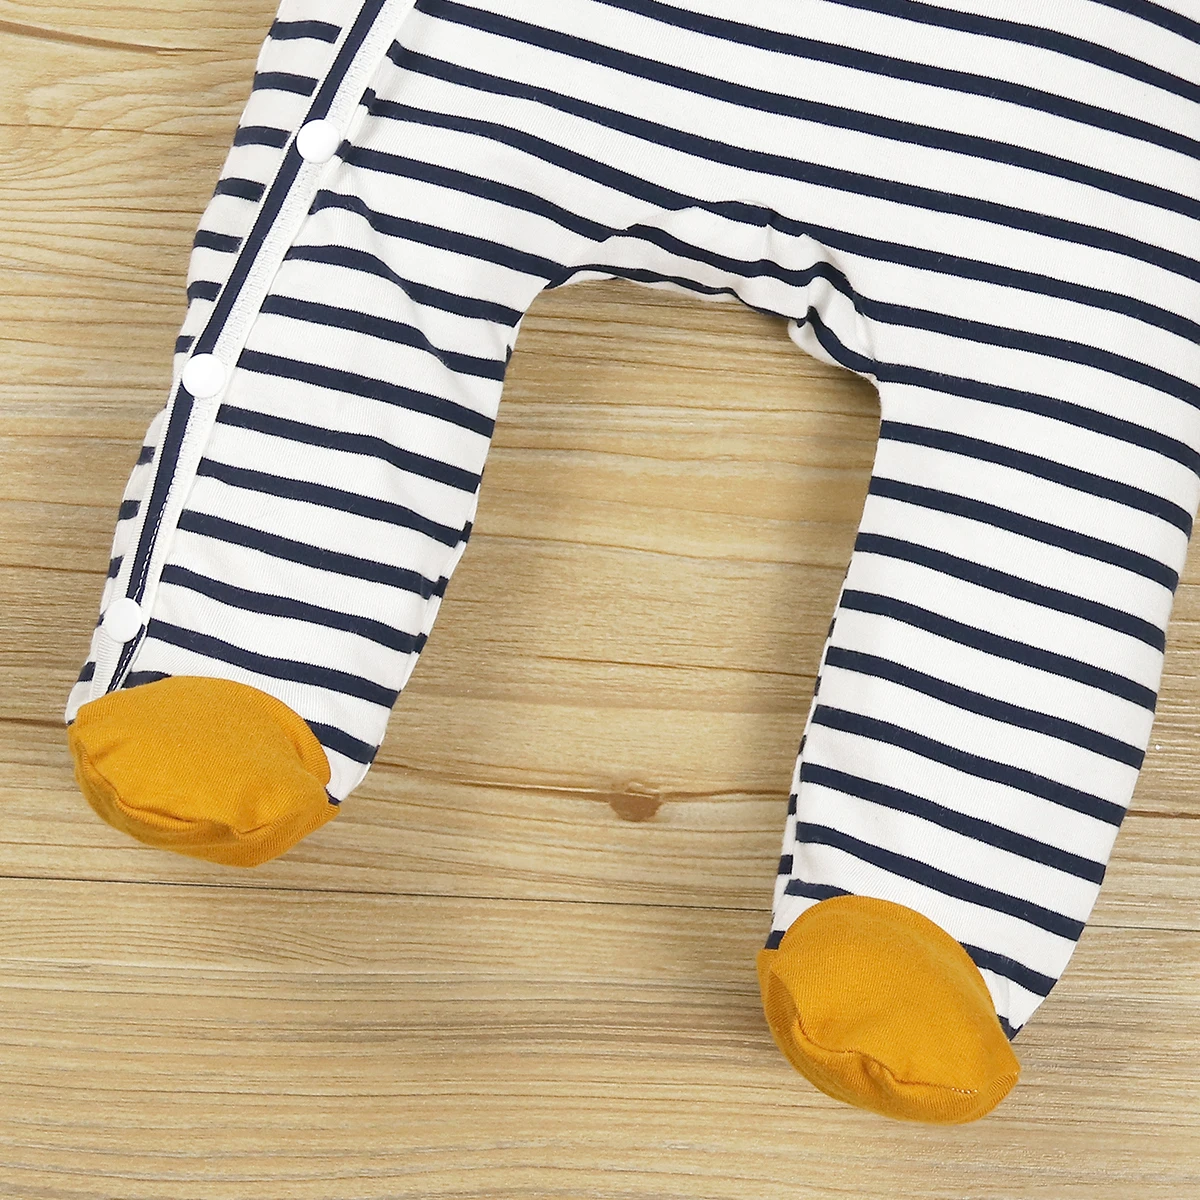 PatPat 2021 New Arrival Autumn and Winter One Piece Warm and Cute Baby Striped Jumpsuit Baby Clothes